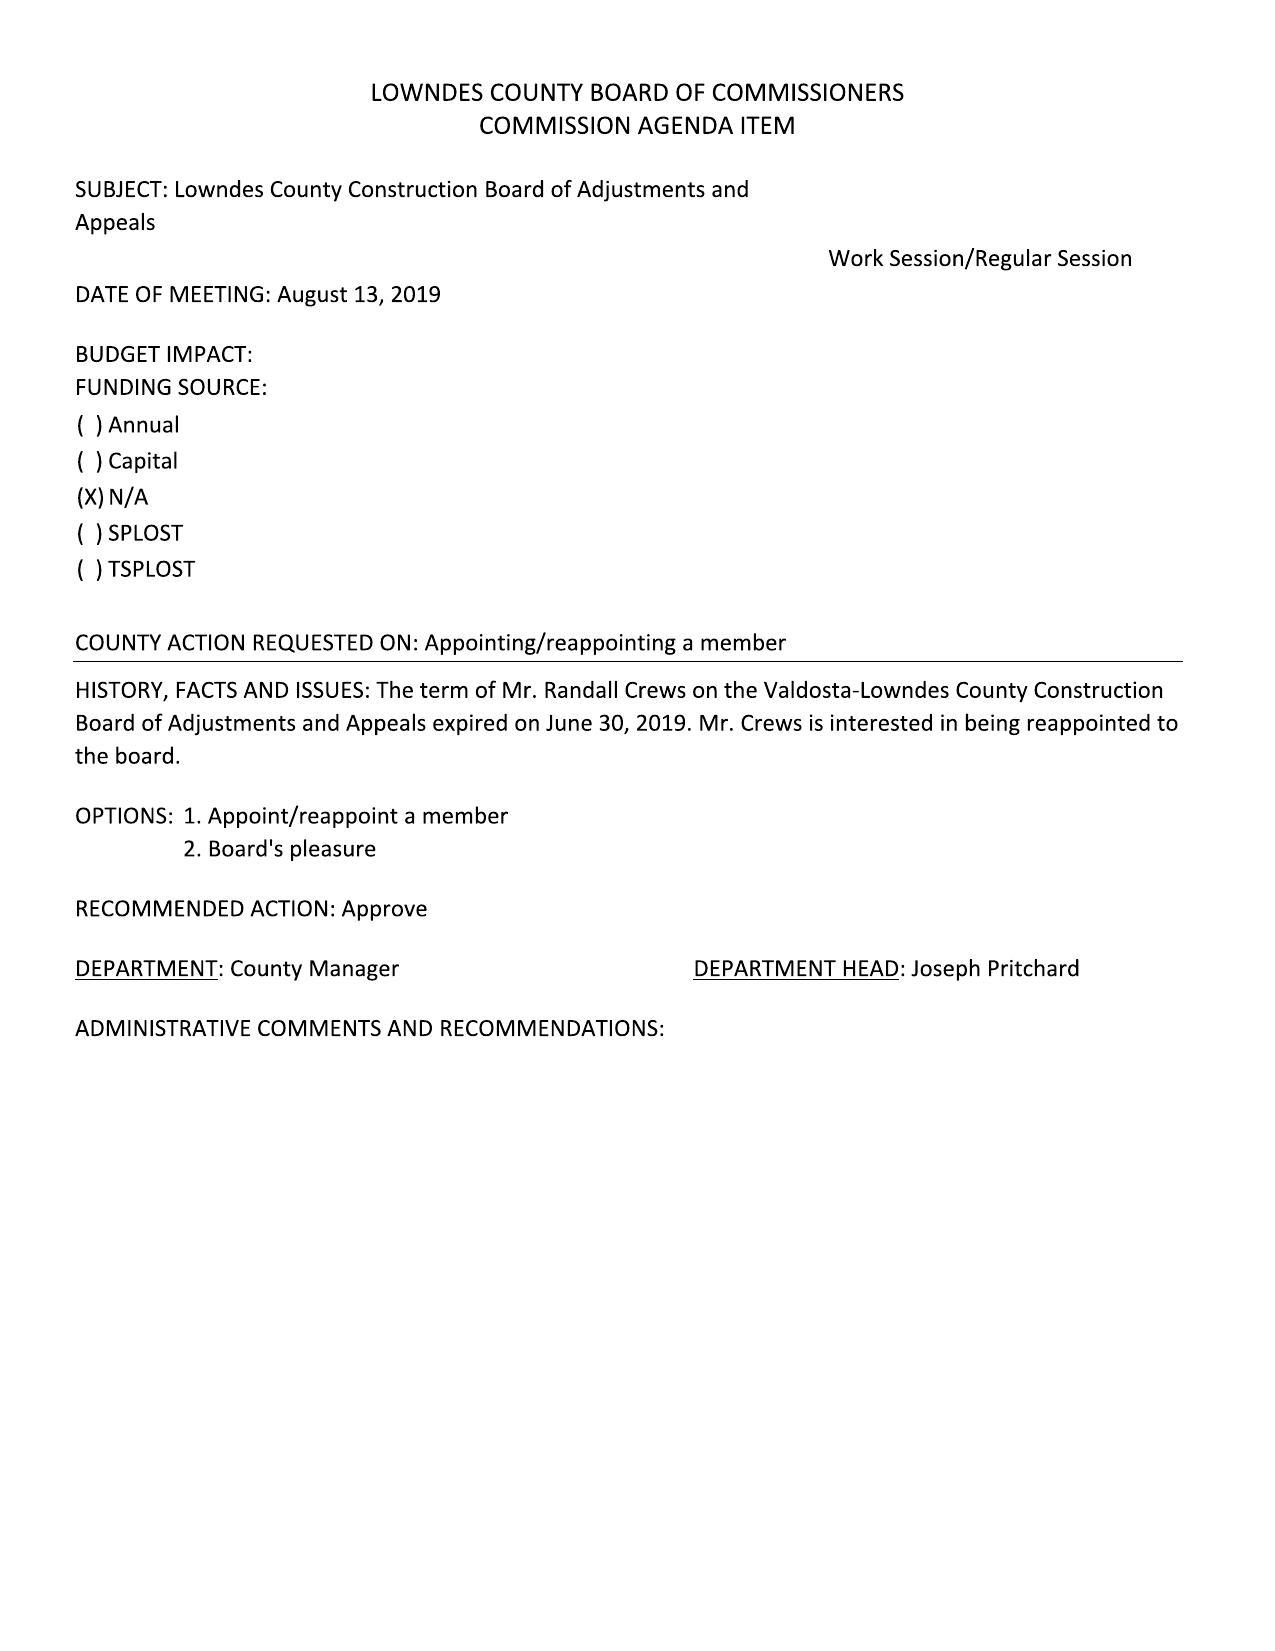 [Lowndes County Construction Board of Adjustments and Appeals]